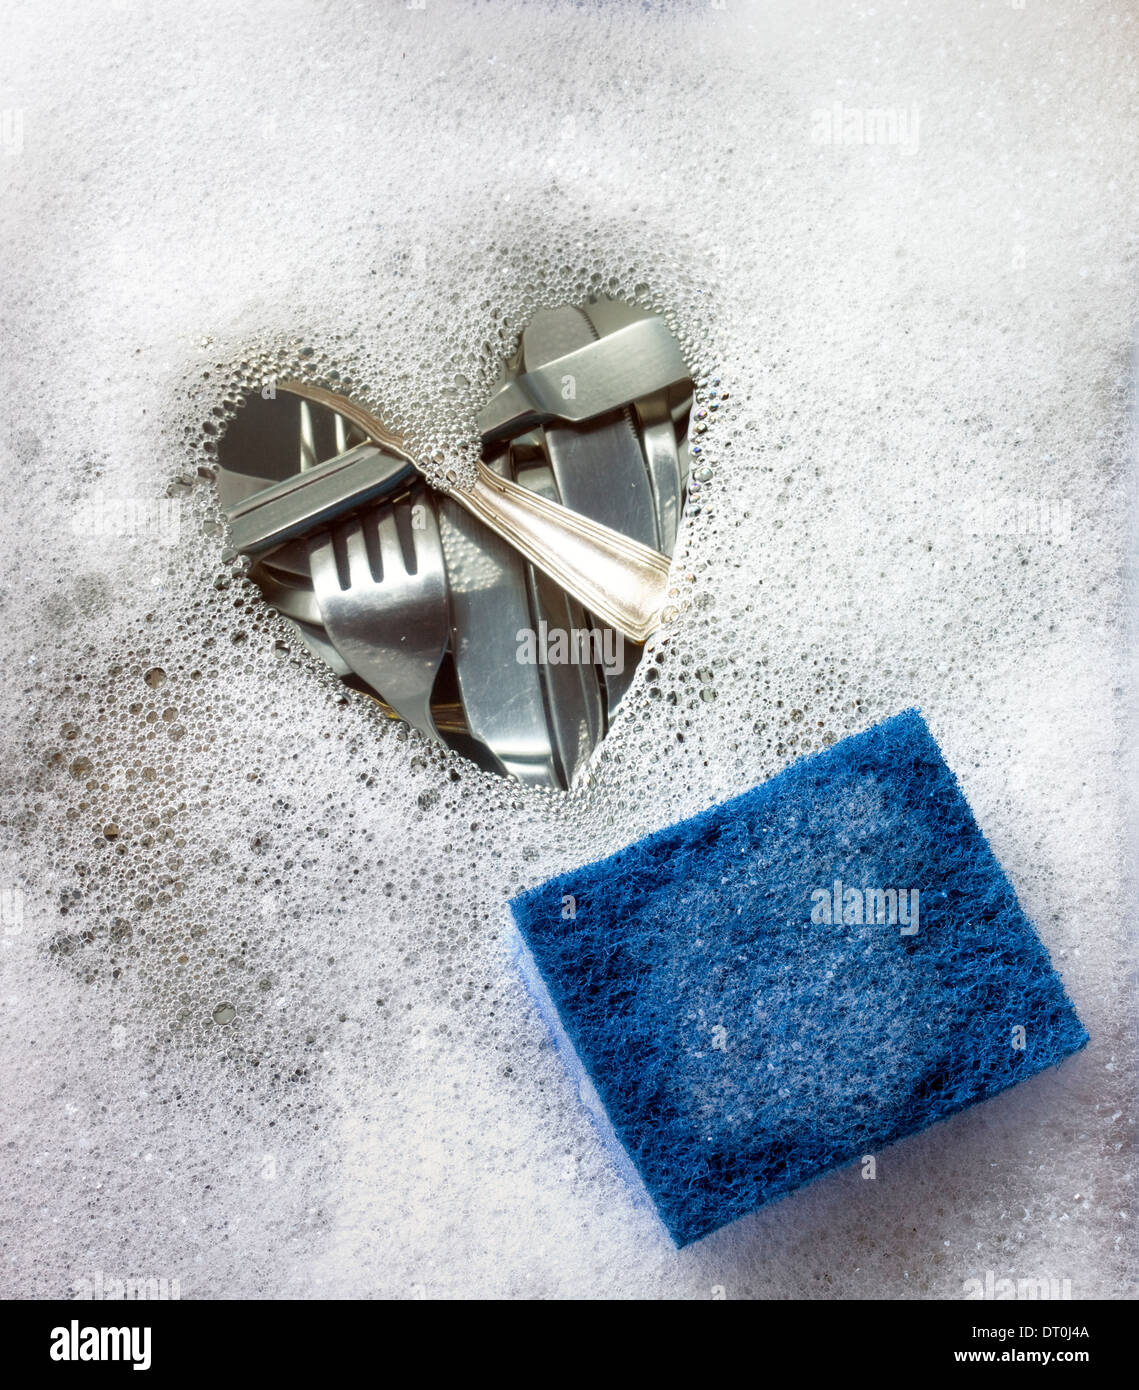 Heart shape in soap suds with cutlery beneath water and a blue scourer. Stock Photo